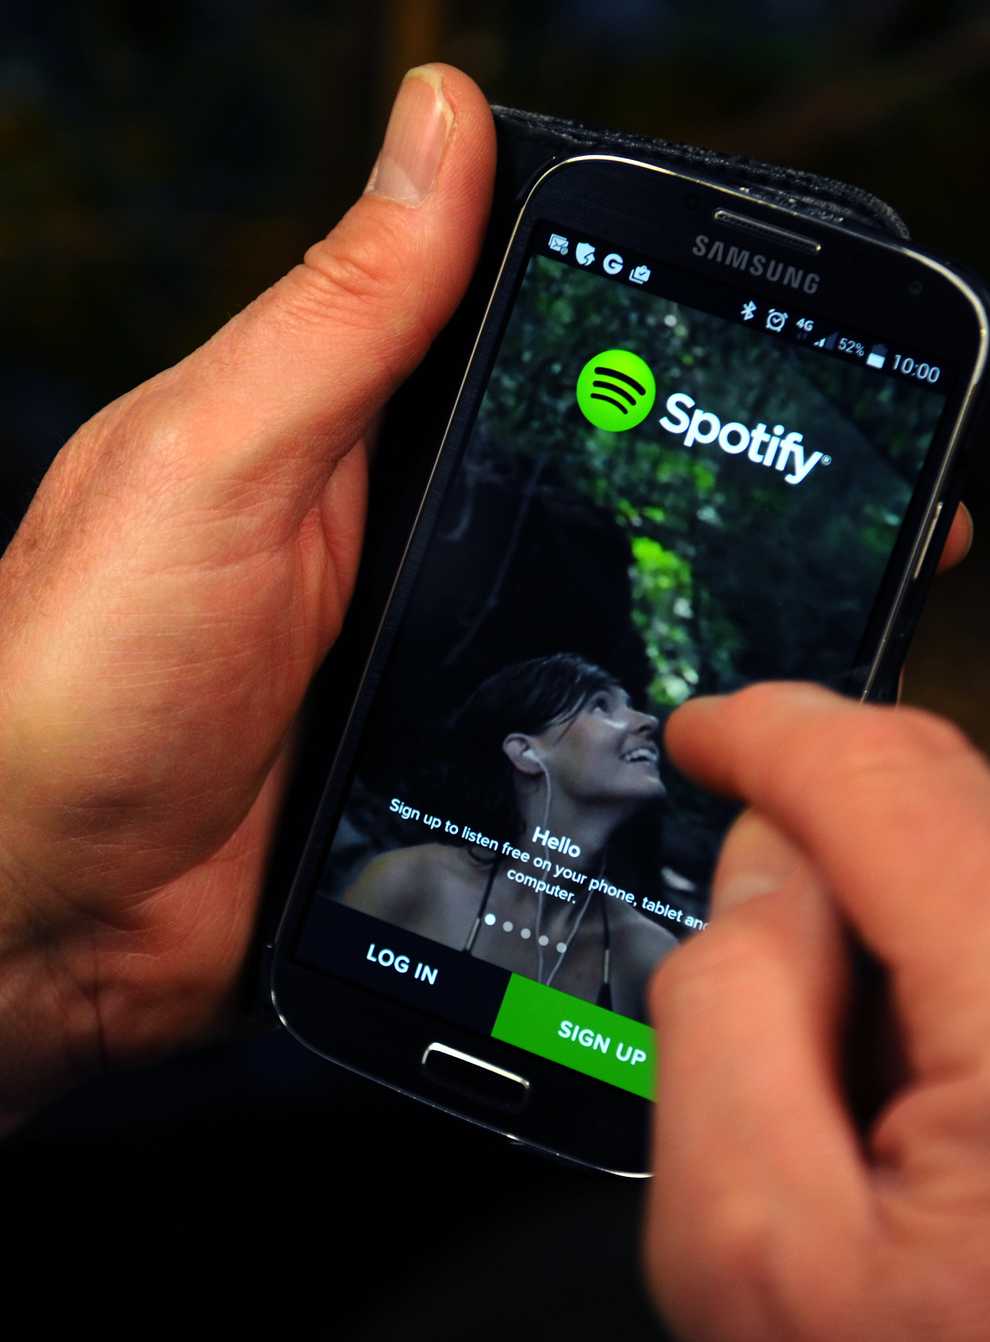 The Spotify App is shown on a Samsung smartphone (Lauren Hurley/PA)